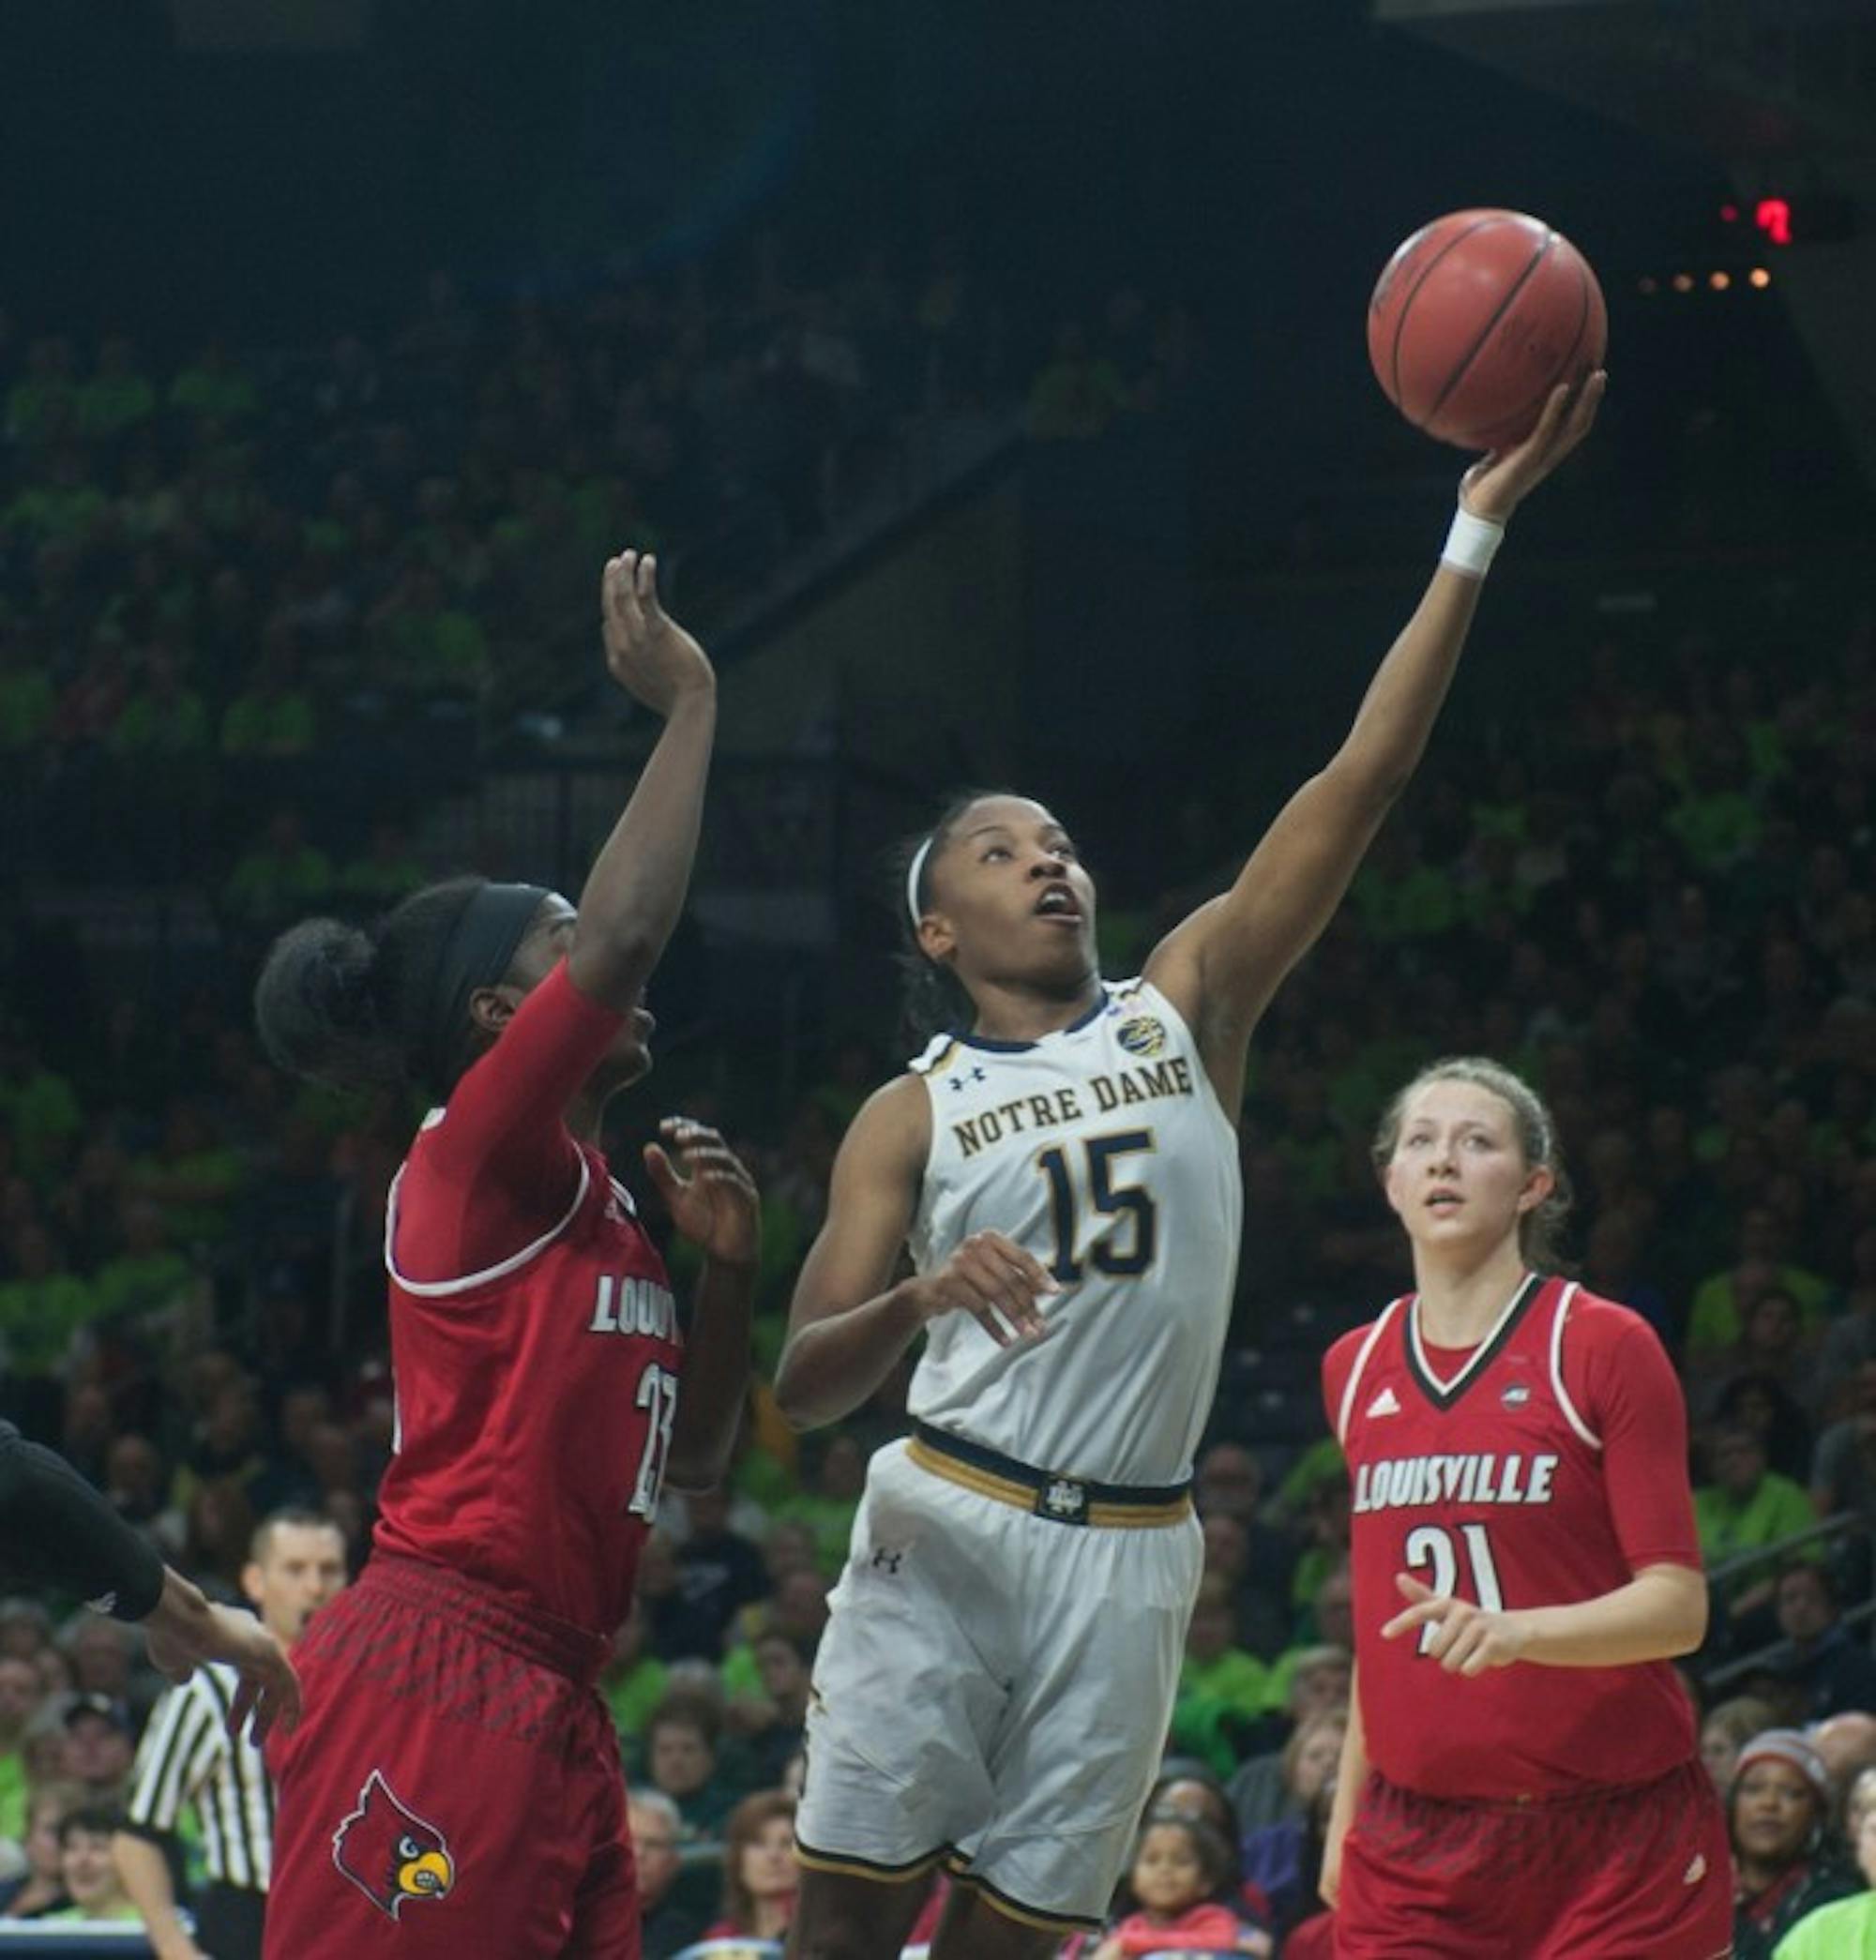 Irish senior guard Lindsay Allen goes up for a layup during Notre Dame’s 85-66 win over Louisville on Monday at Purcell Pavilion.